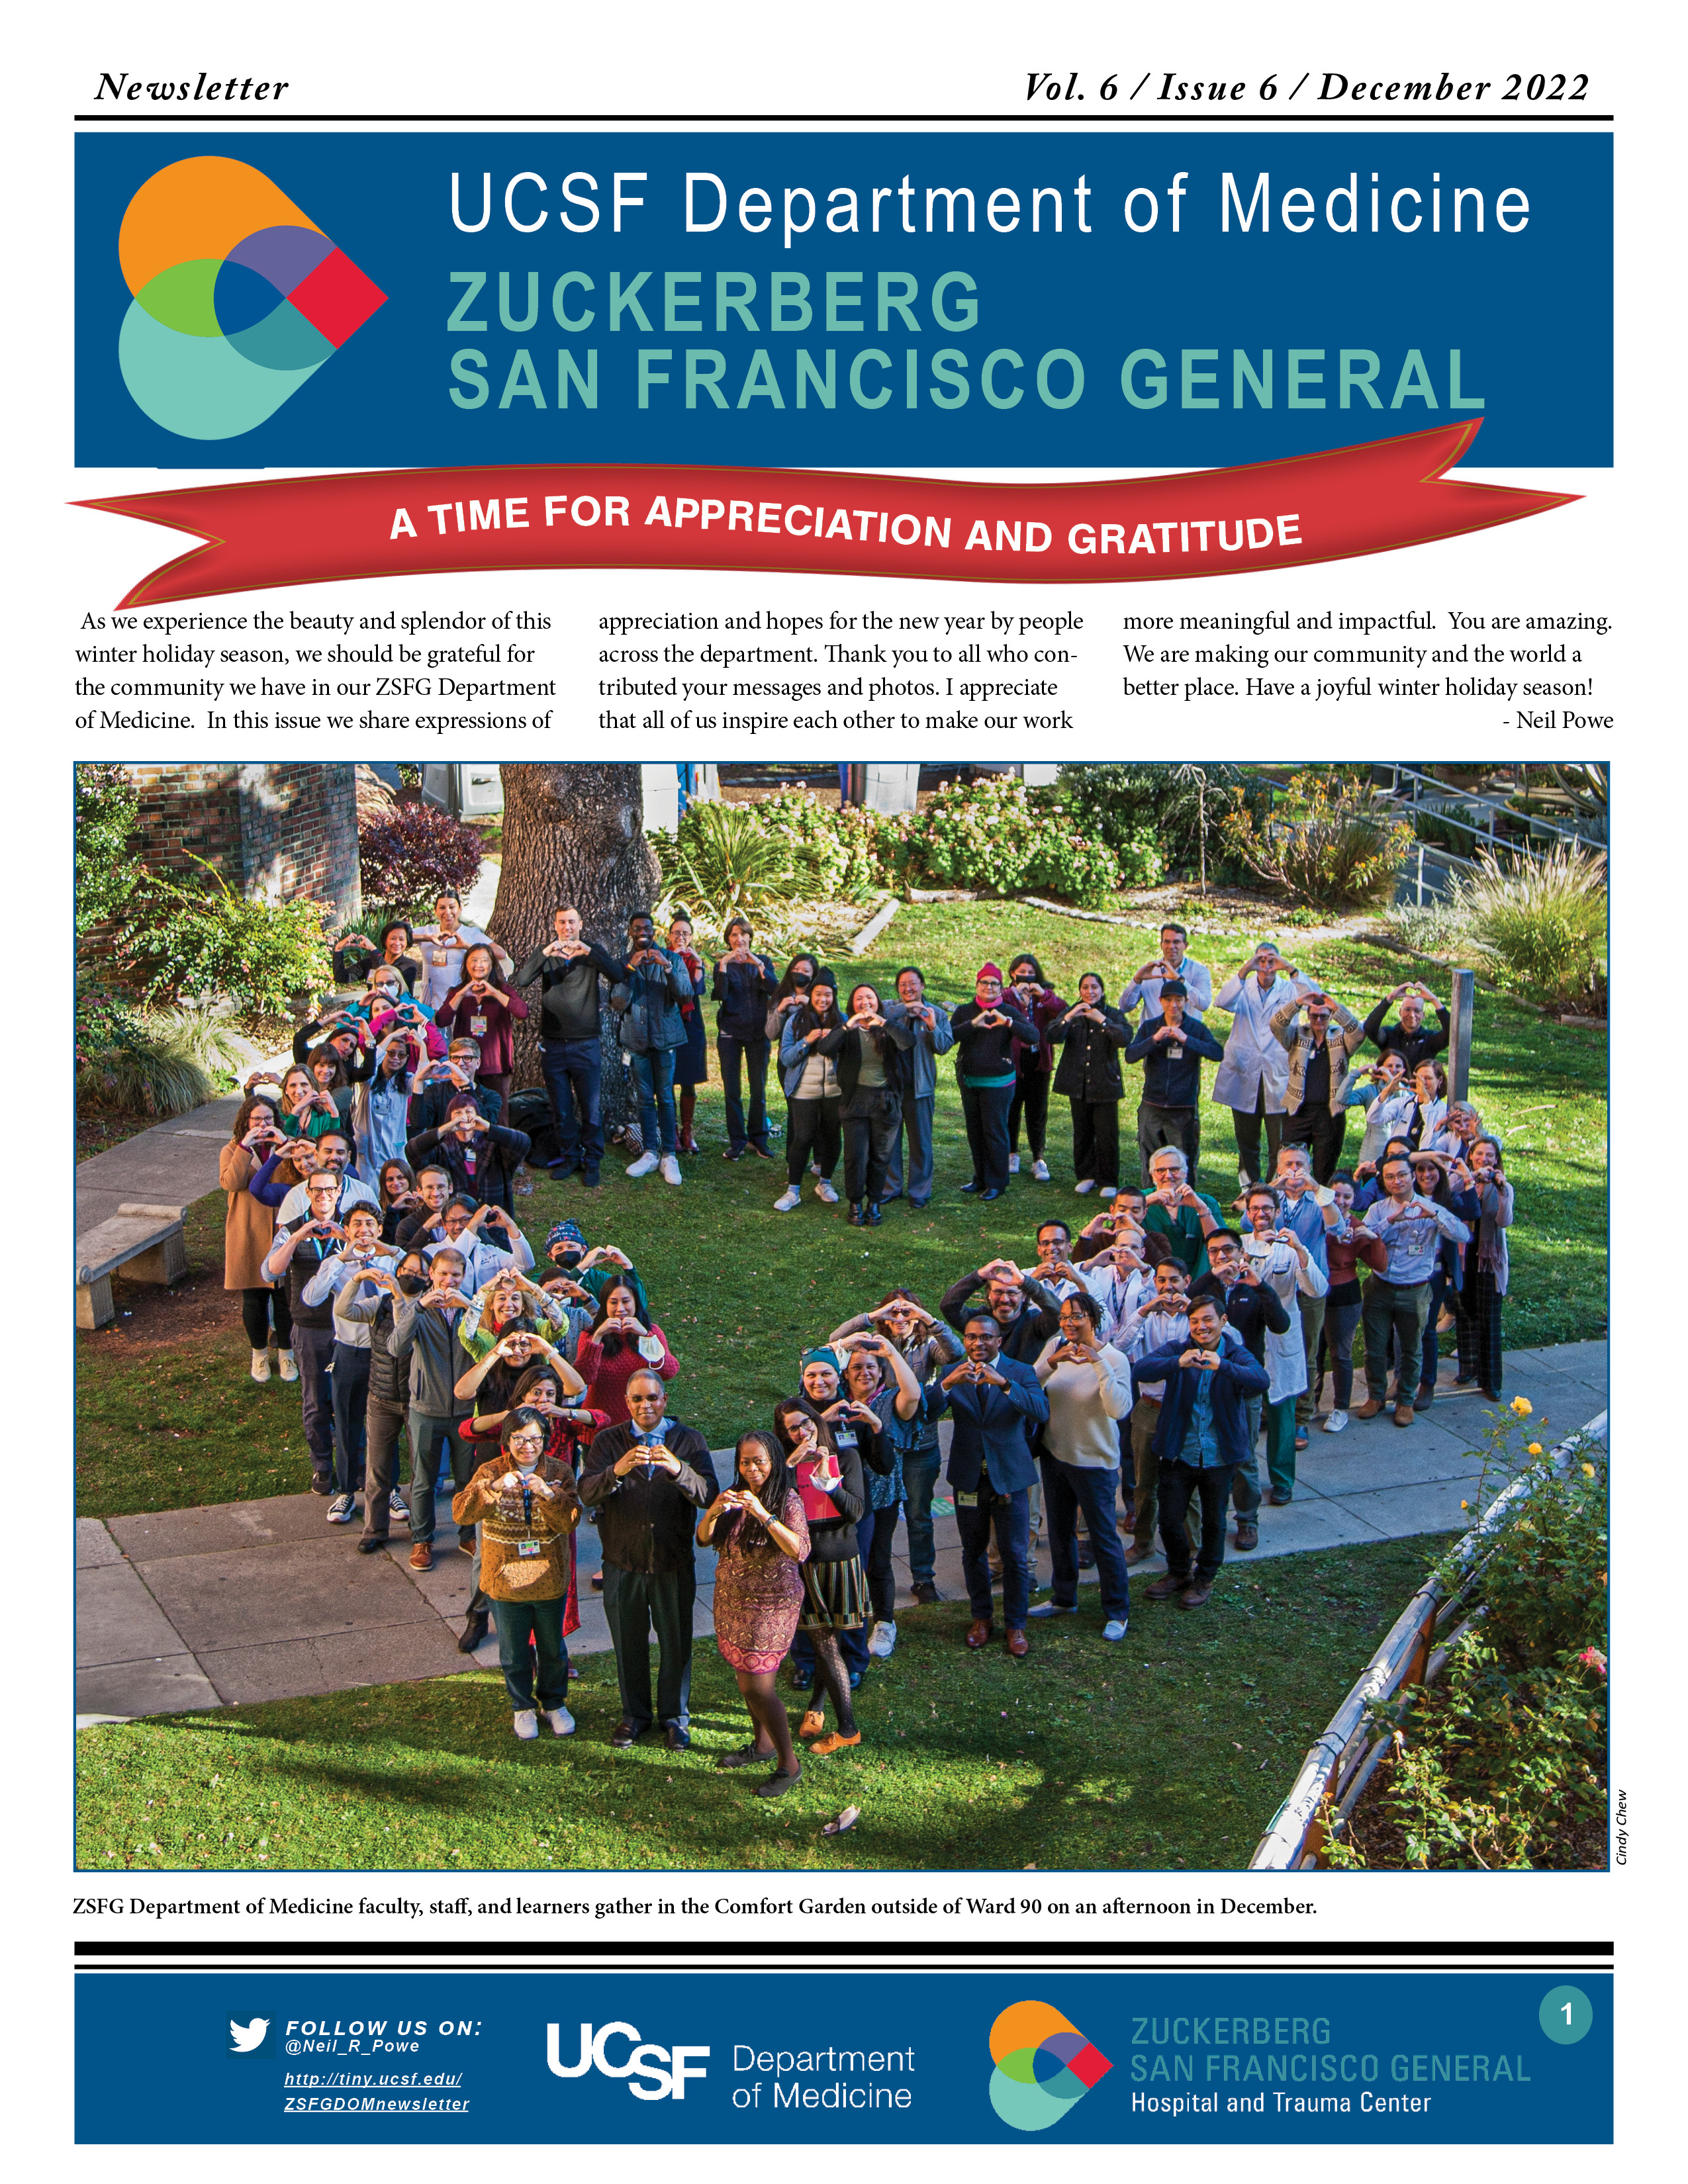 Newsletter cover with red banner that says a time for appreciation and gratitude. Under it is a large photo of people standing on a green lawn with their bodies arranged in a shape of a heart and making a heart shape with their hands. 